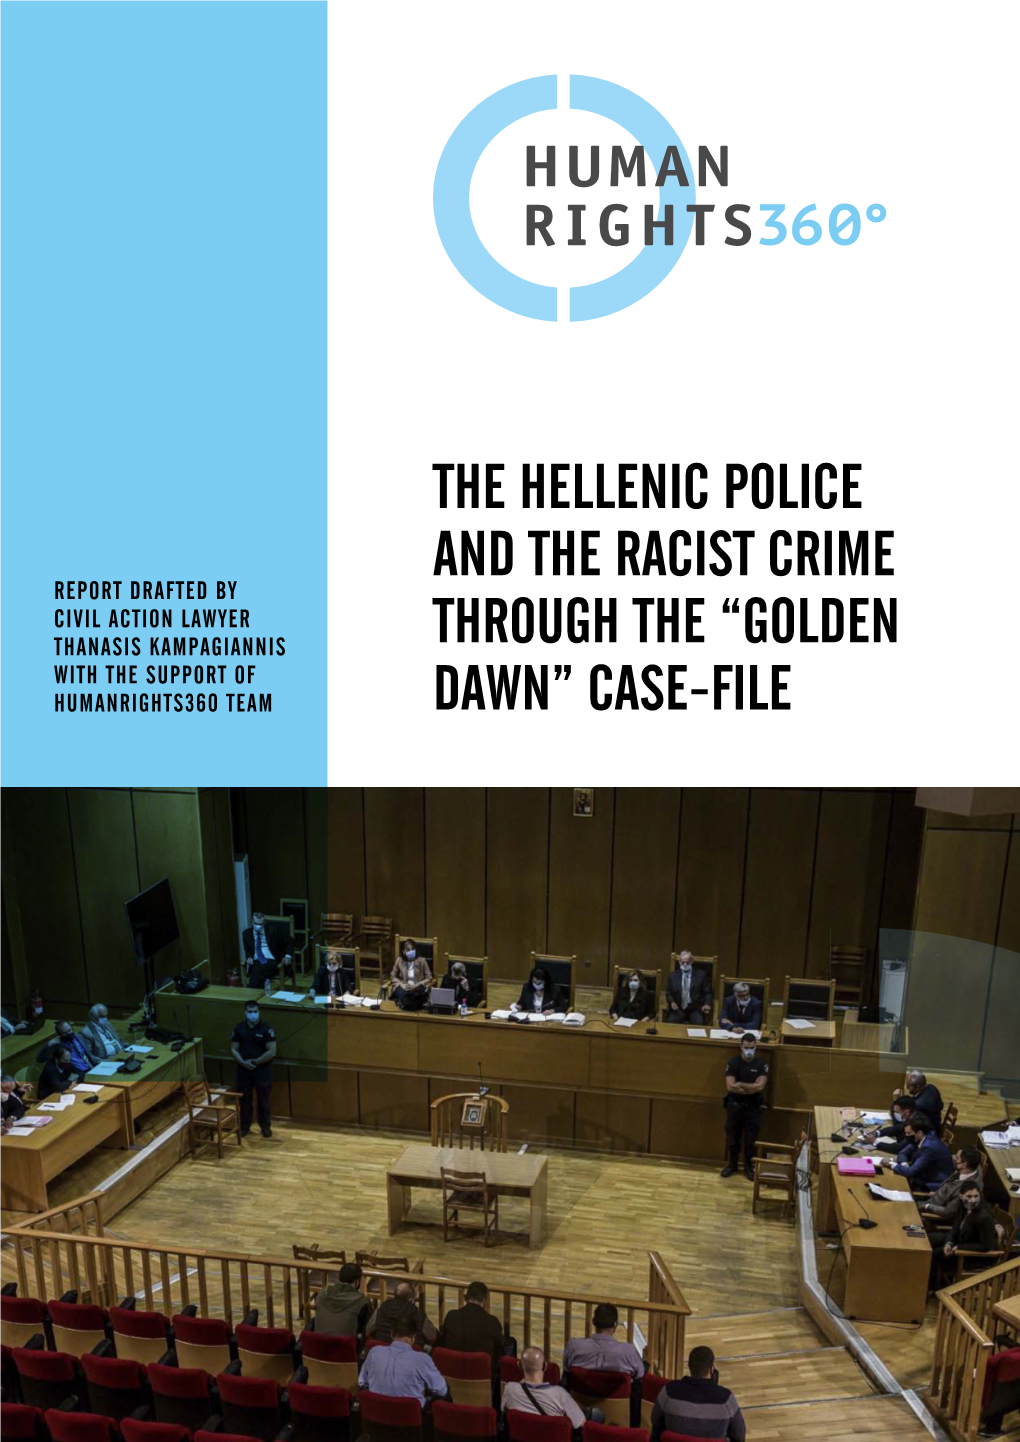 The Hellenic Police and the Racist Crime Through the “Golden Dawn” Case-File